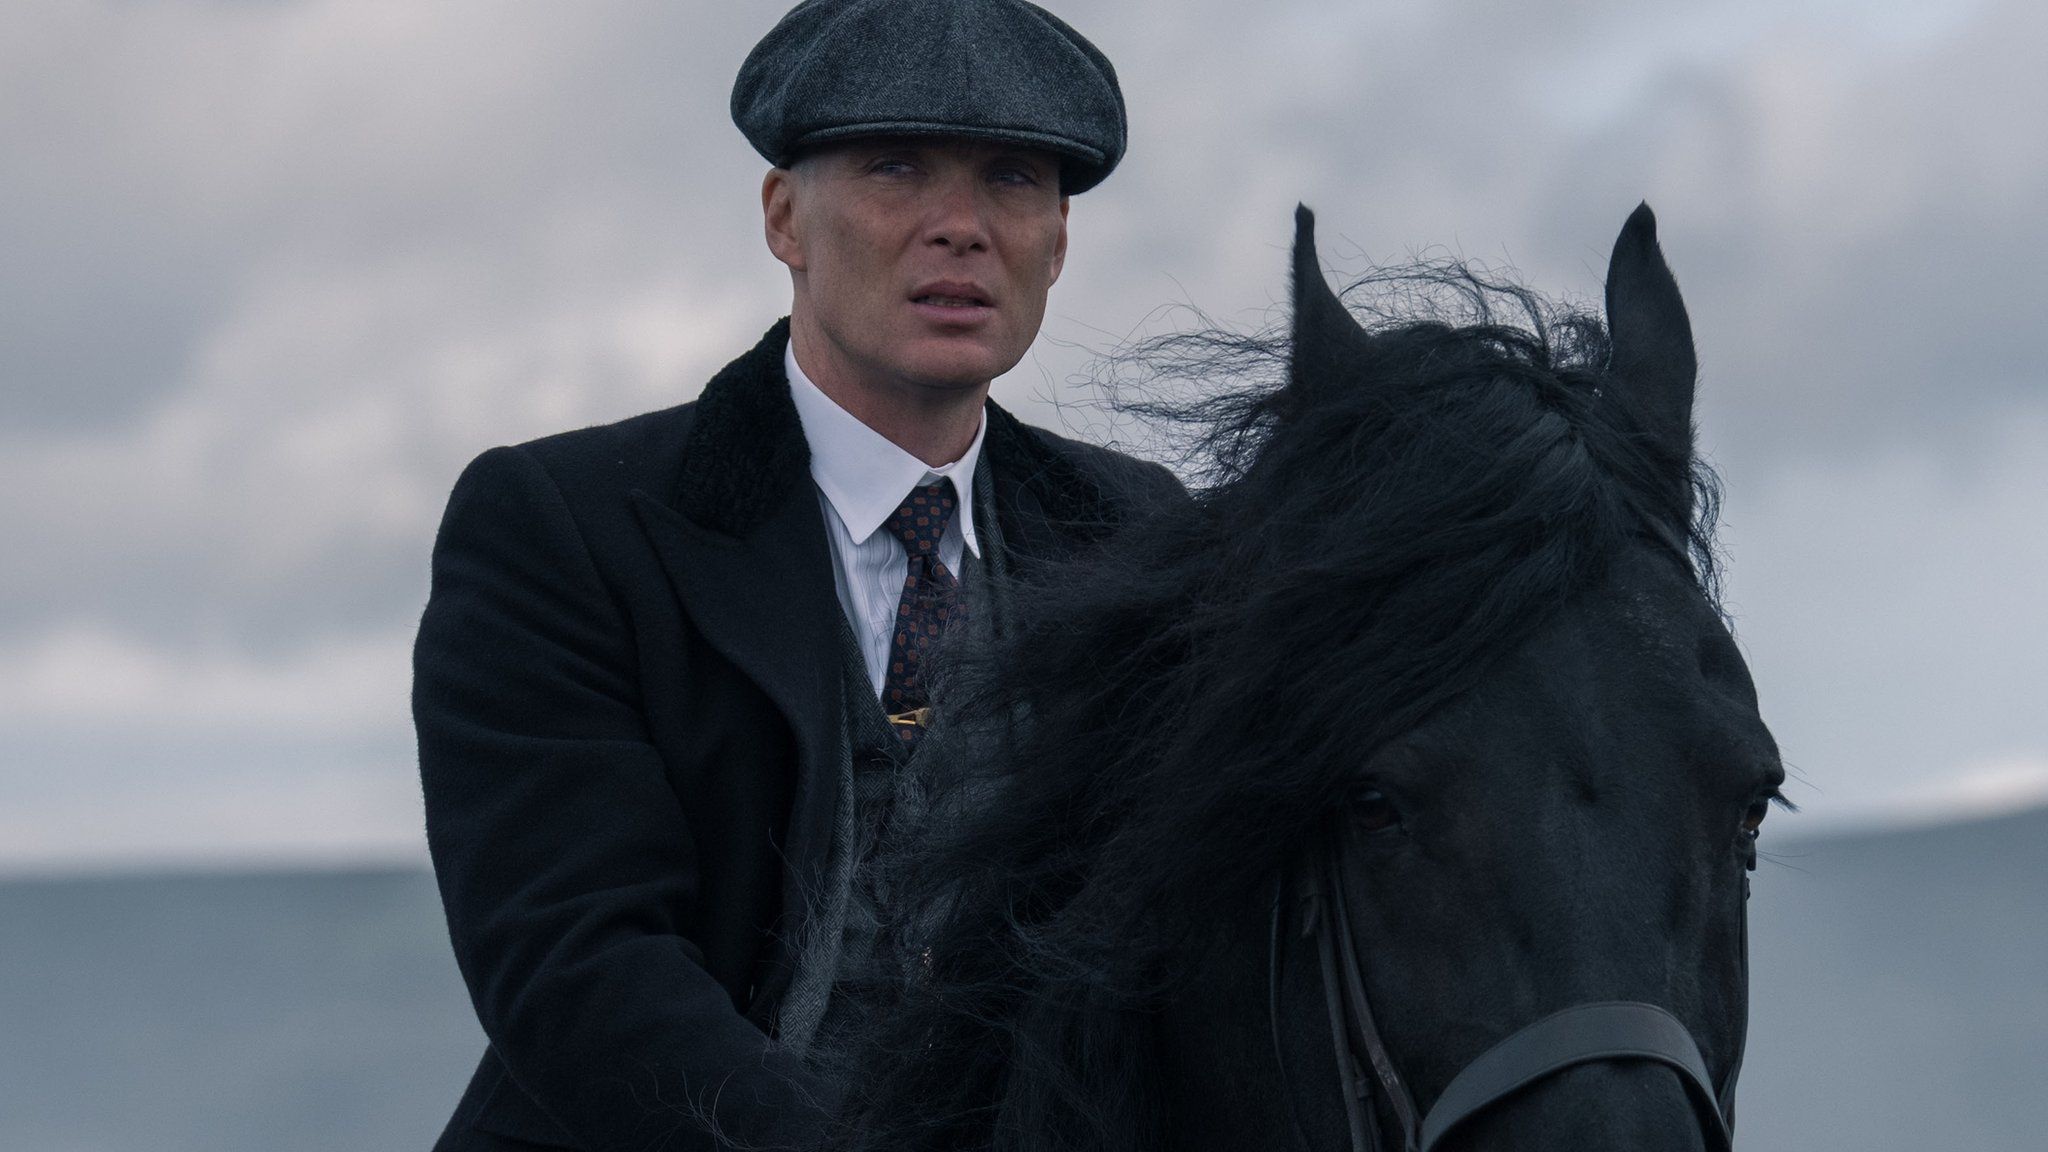 The festival letting fans follow in the footsteps of the Peaky Blinders